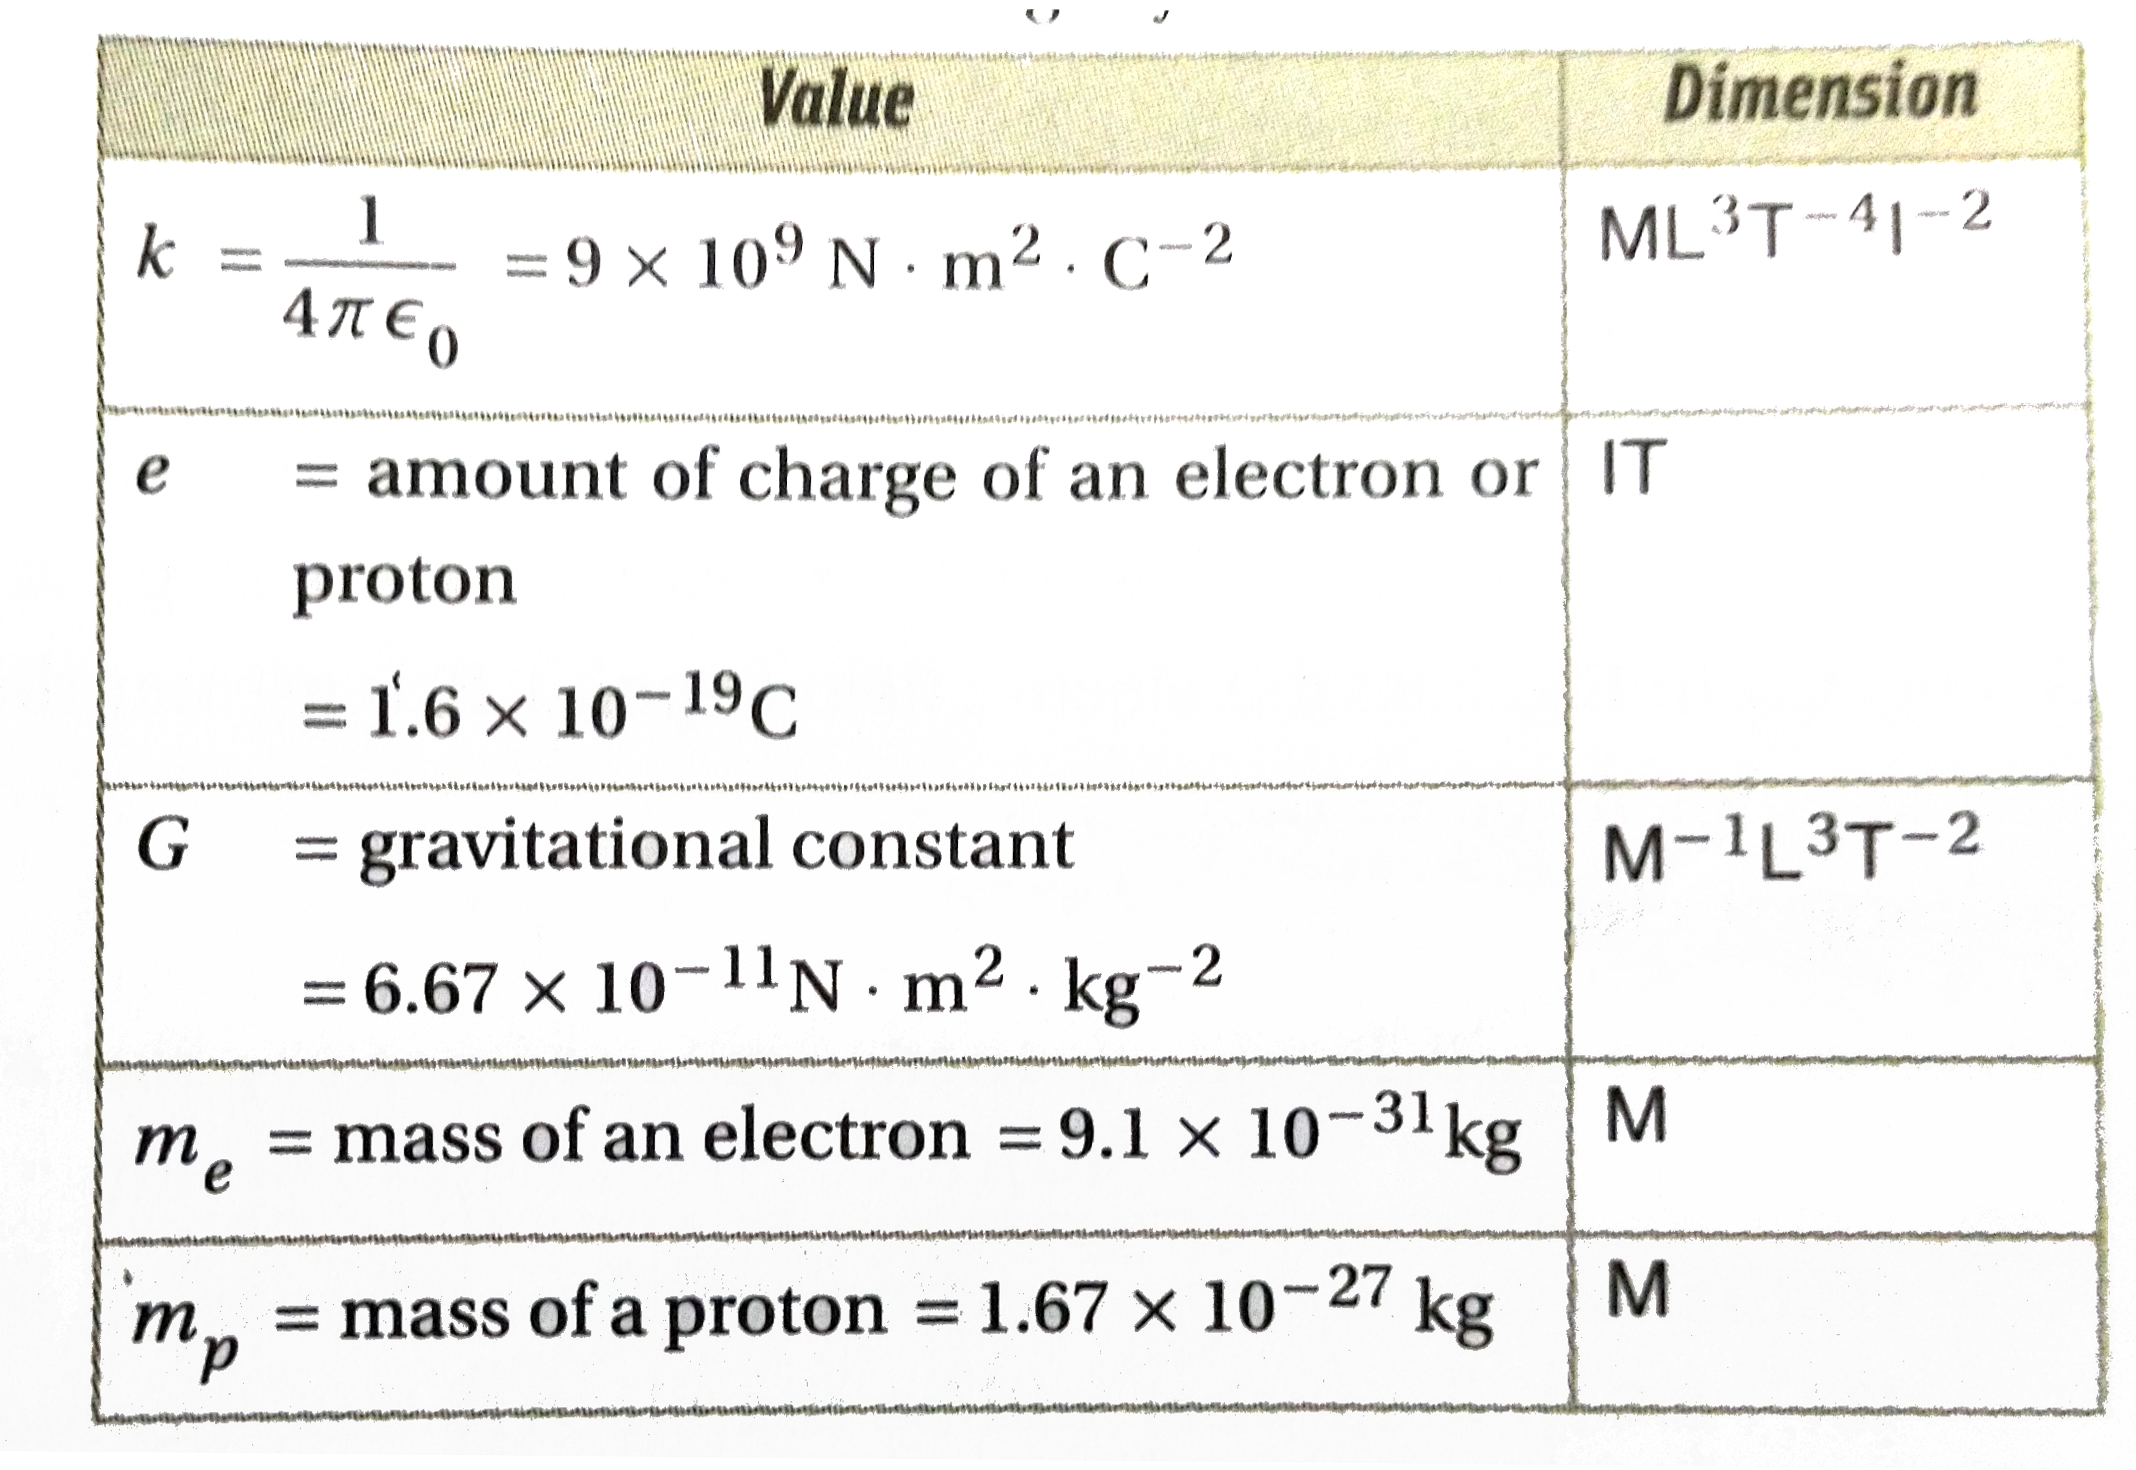 Check that the ratio ke^(2)//Gm(e)m(p) is dimensionless. From the table of physical constants, determine the value of this ratio. What does the ratio signify?